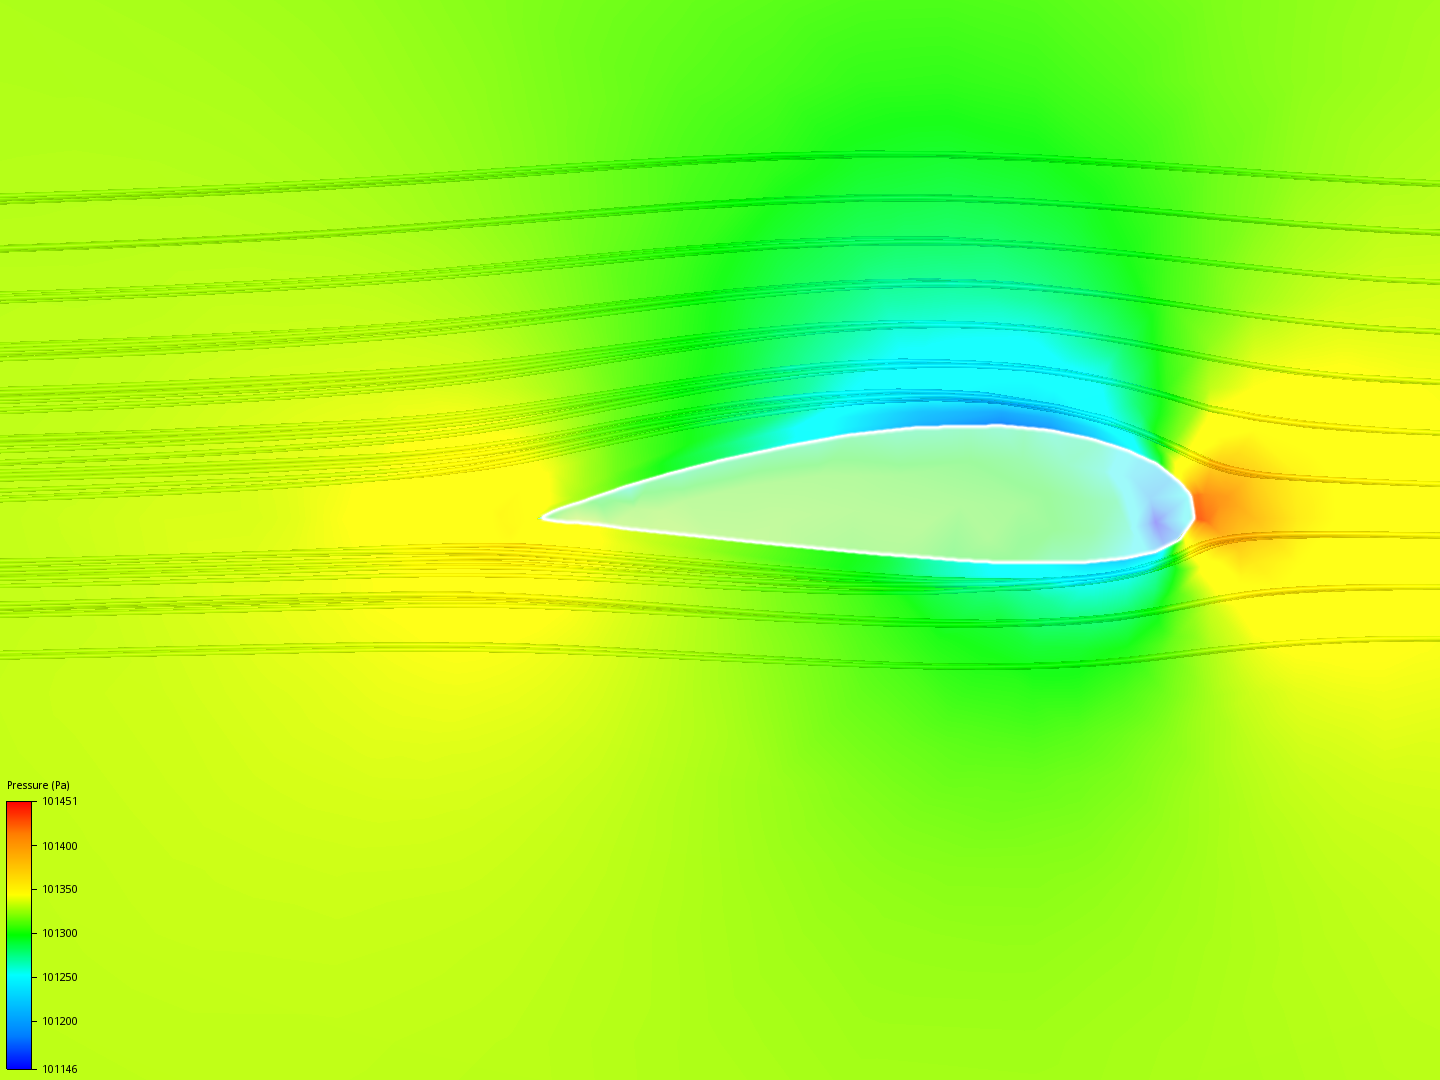 Airfoil1 image